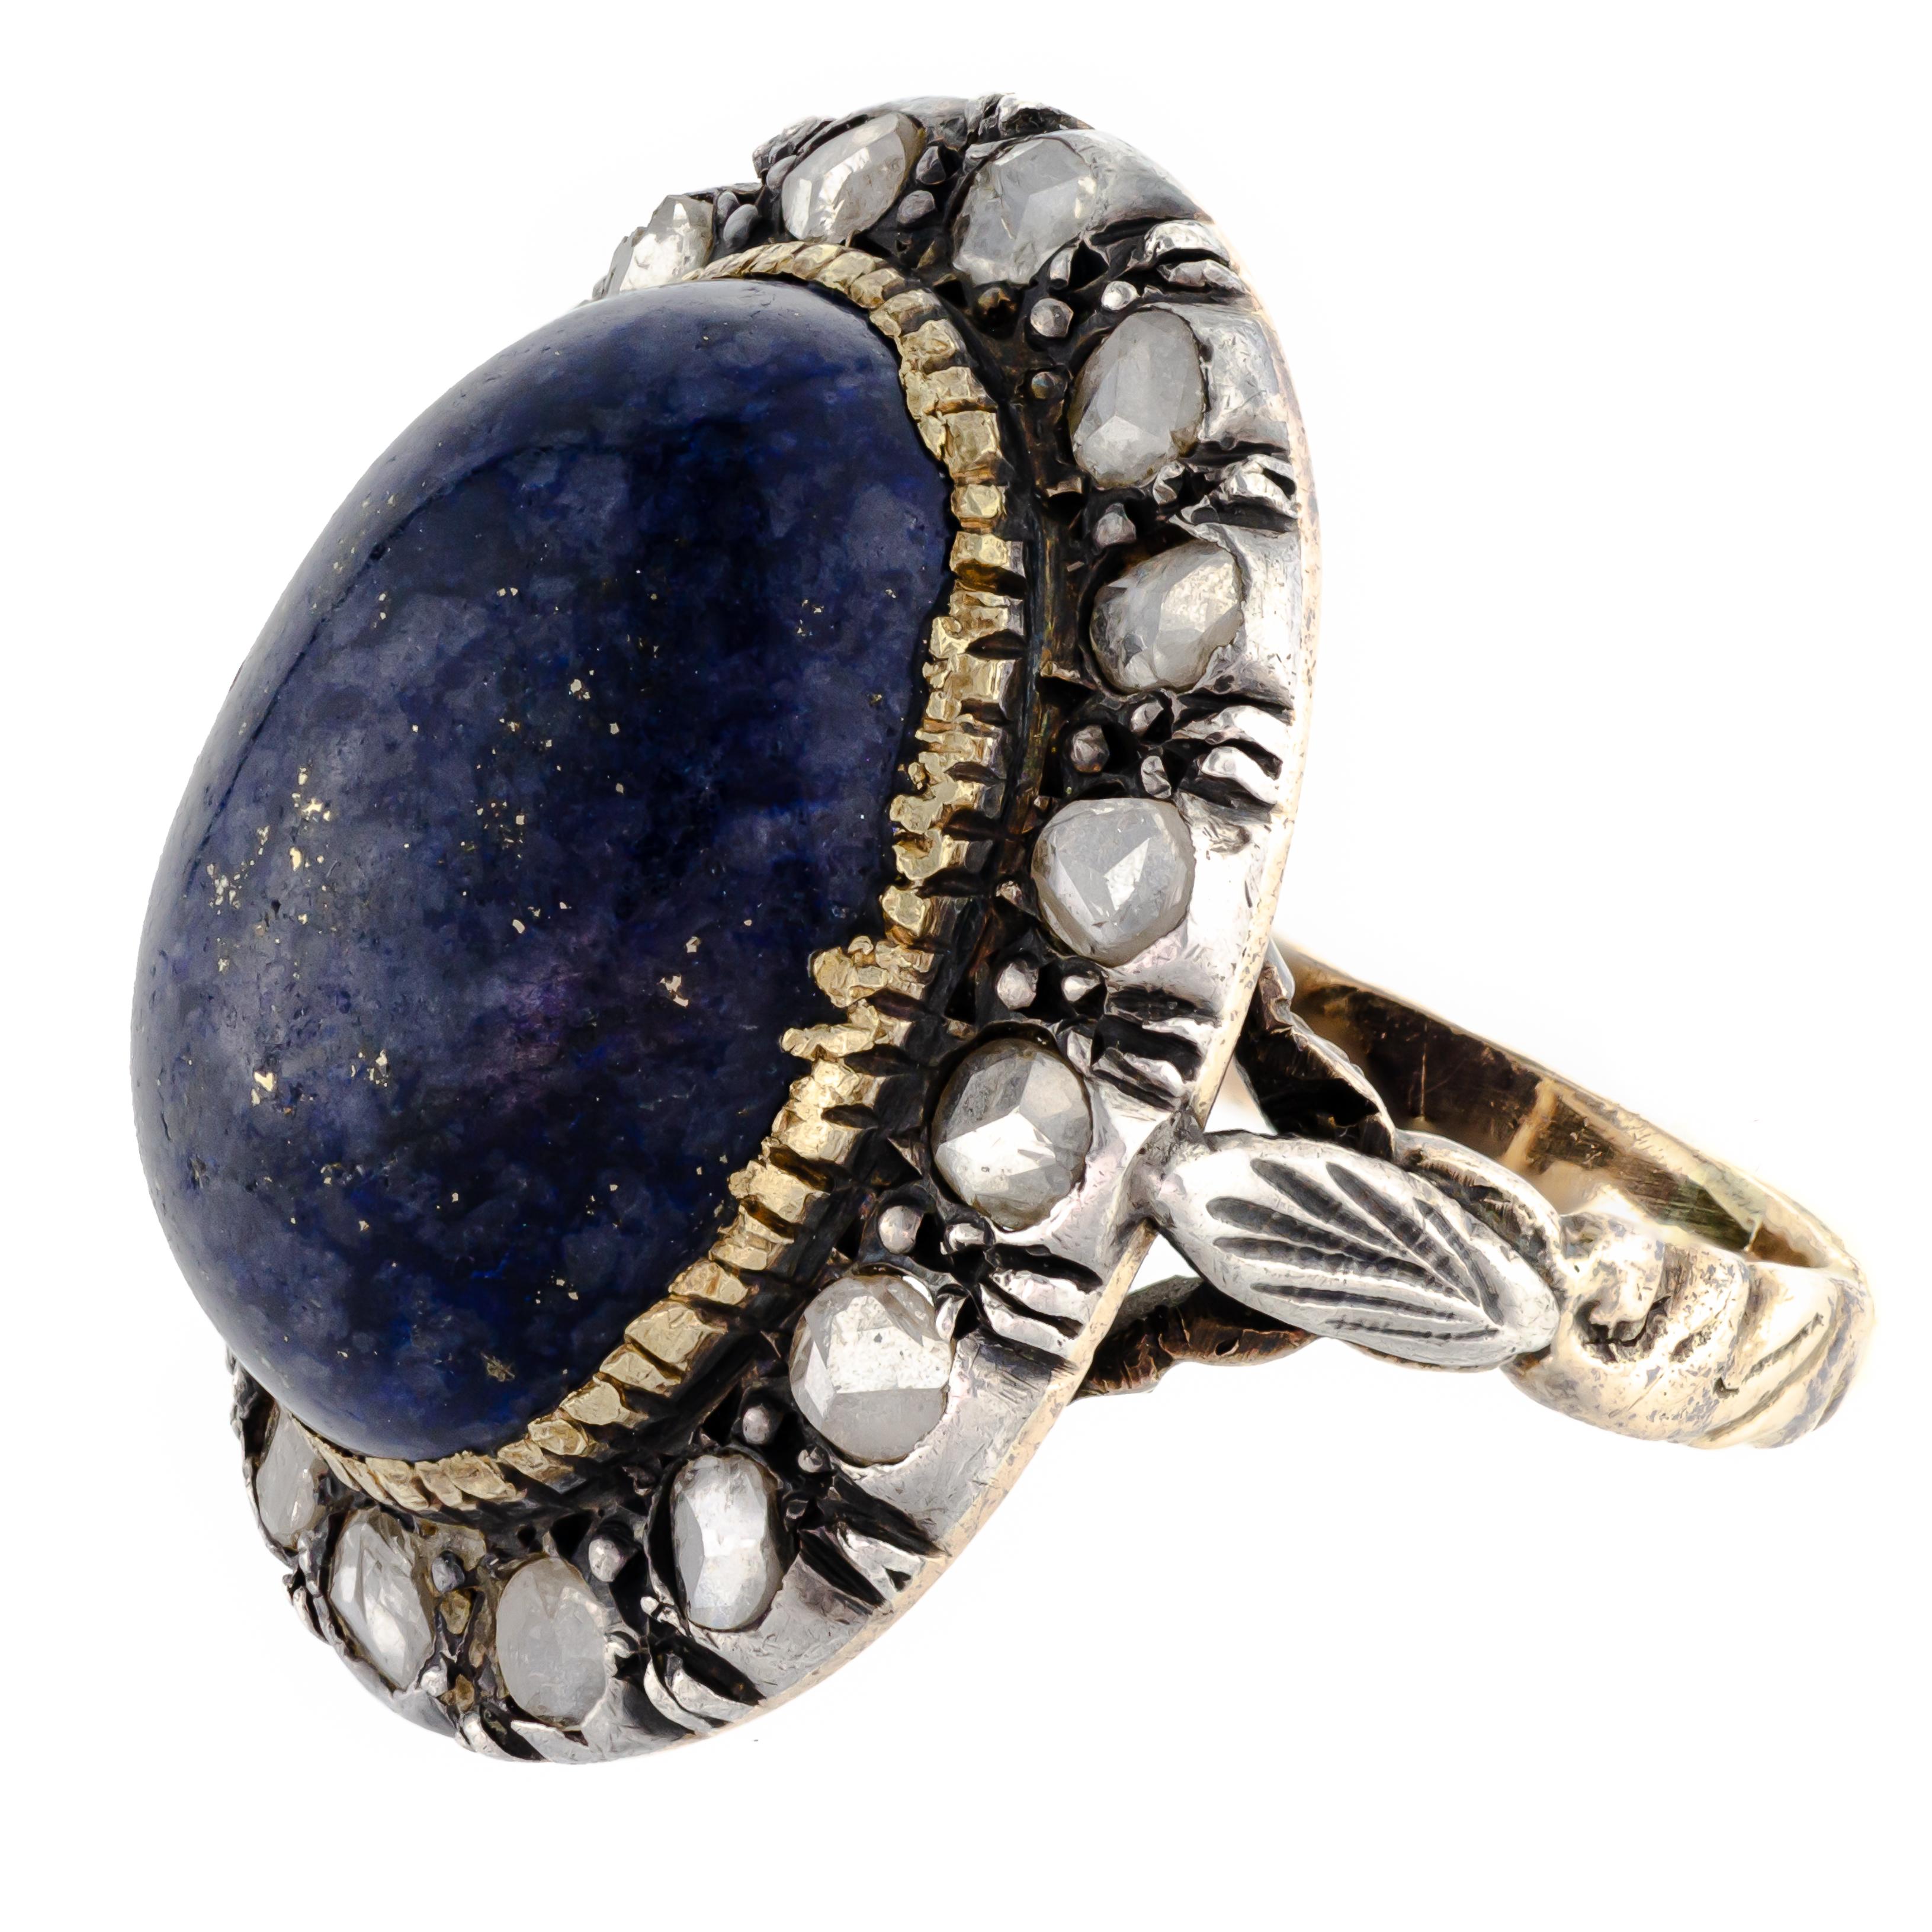 Attractive circa 1915 lapis and rosecut diamond ring centrally set with one (1) oval cabochon measuring approximately 18 x 12.5mm framed by 16 rosecut diamonds - unmarked but tested bicolor mount of silver (diamonds set in silver as was the style)